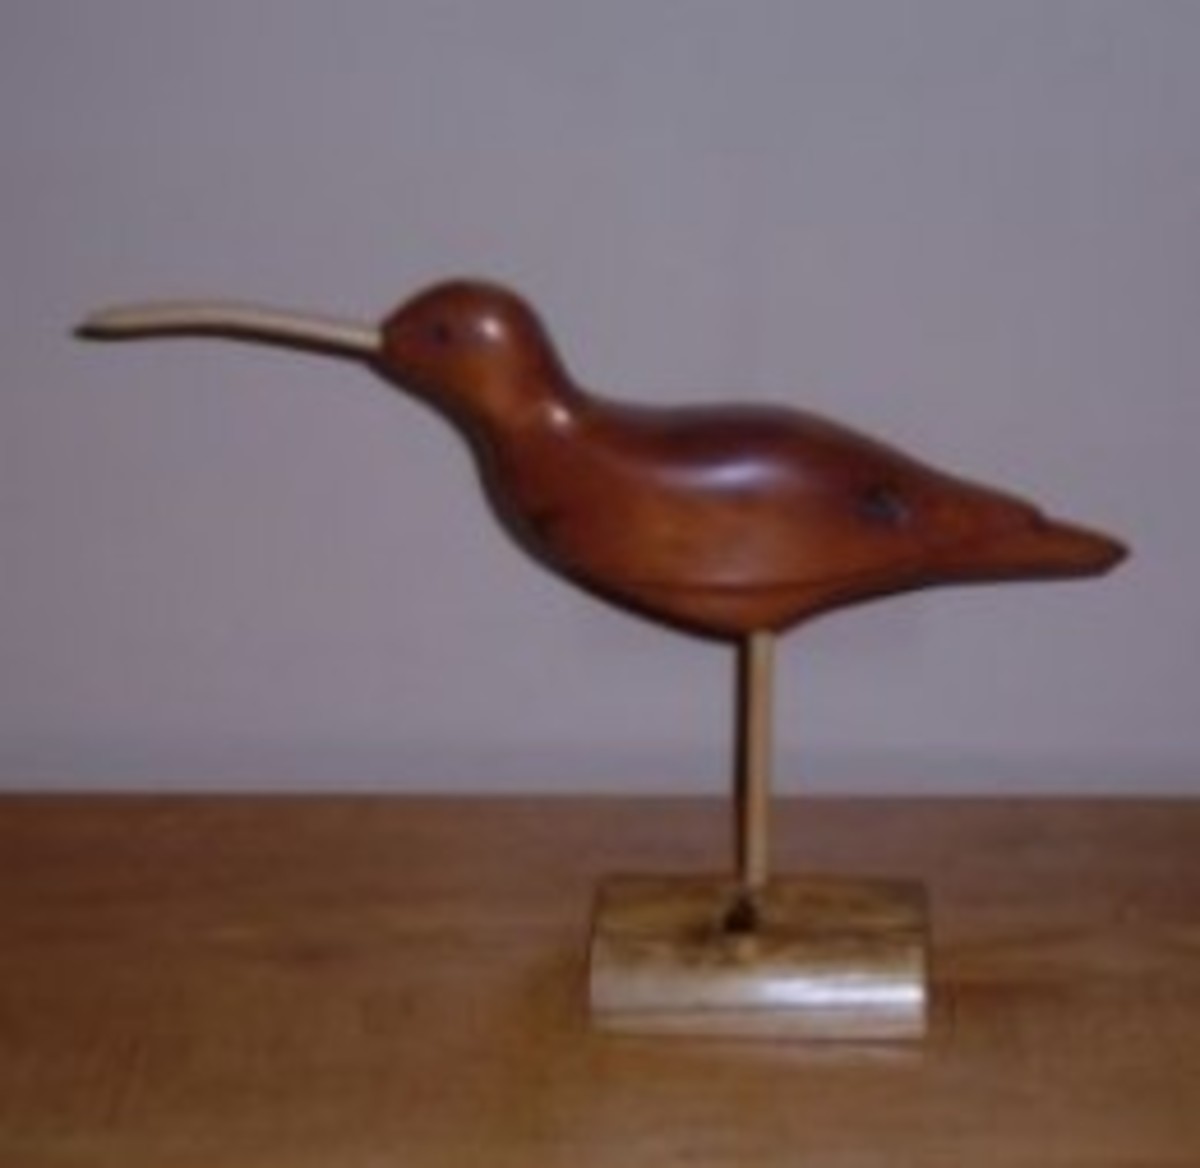 Handcrafted Curlew Decoy